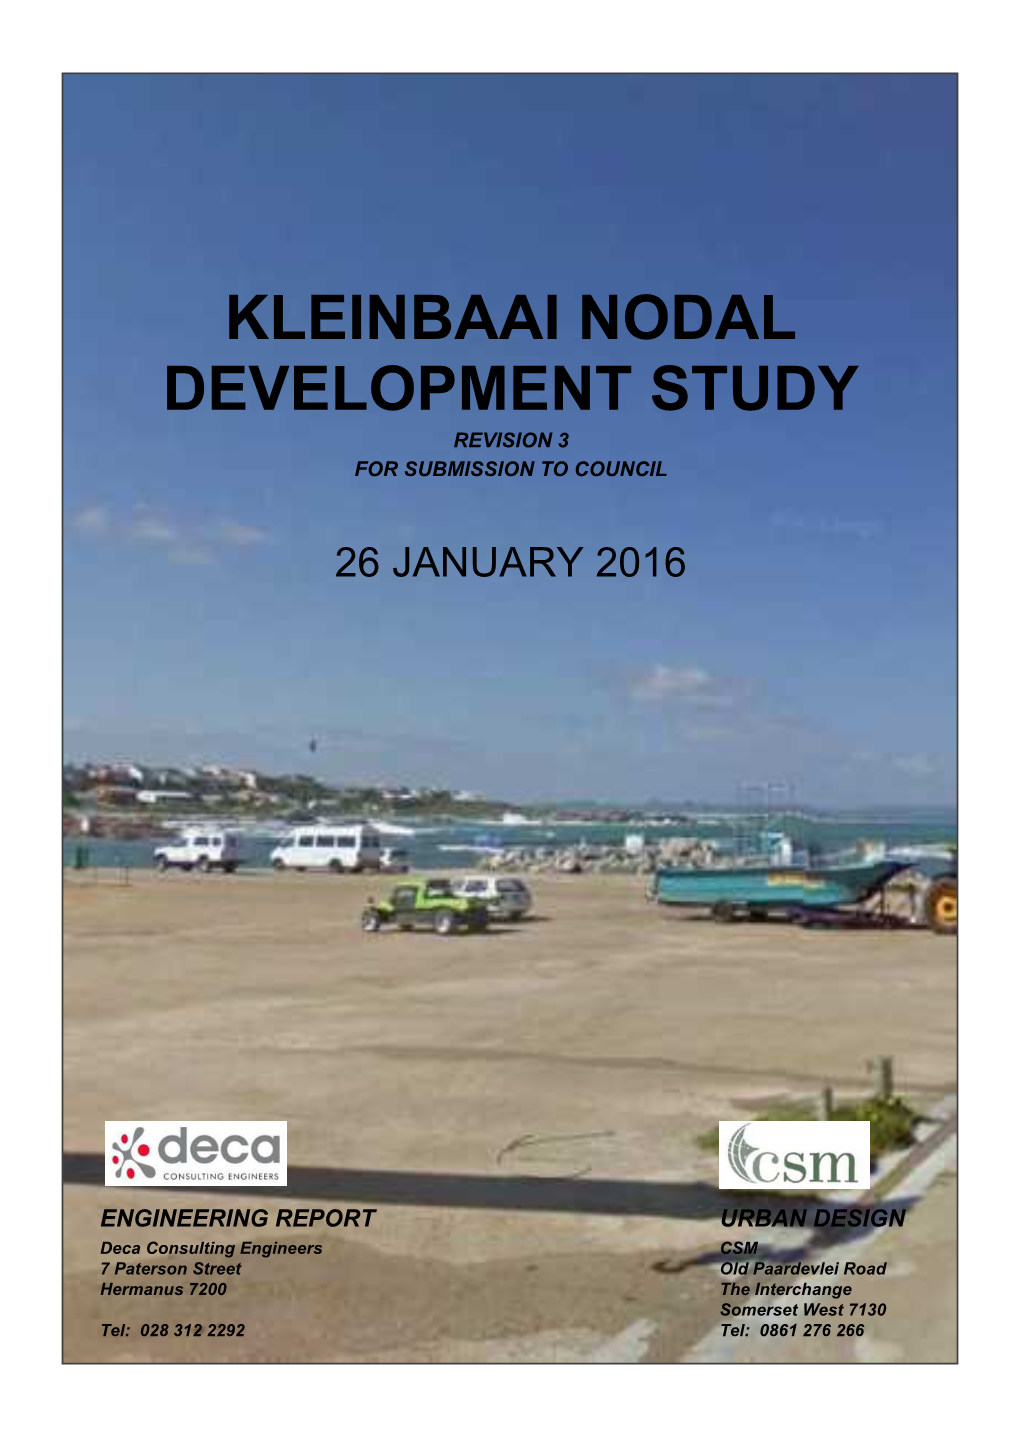 Kleinbaai Nodal Development Study Revision 3 for Submission to Council